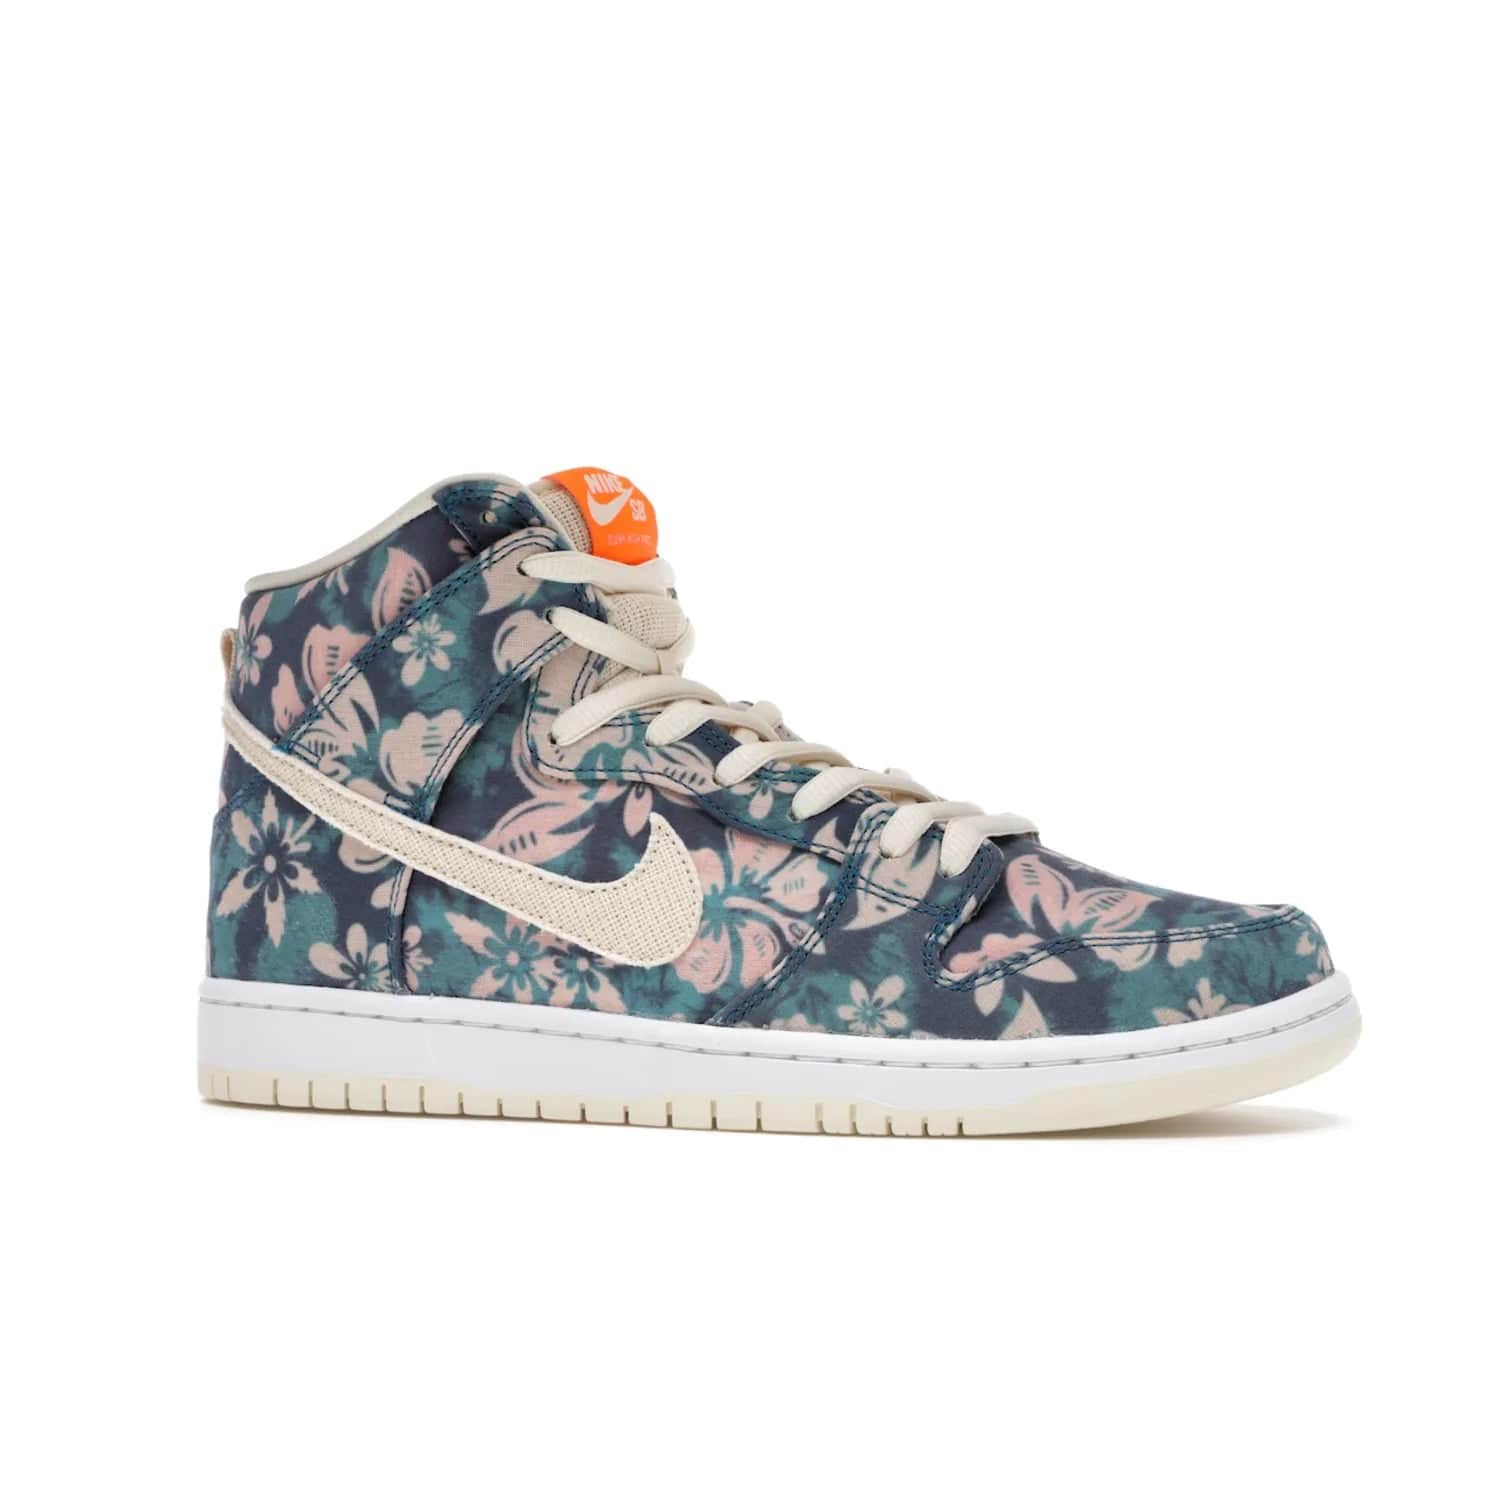 Nike SB Dunk High Hawaii - Image 3 - Only at www.BallersClubKickz.com - Introducing the Nike SB Dunk High Hawaii, a colorway celebrating an island paradise. This hybrid silhouette brings together tropical vibes with a sun-soaked look. Blue, green, pink and orange on a sail and white outsole. Get your island vibes with the Nike SB Dunk High Hawaii.